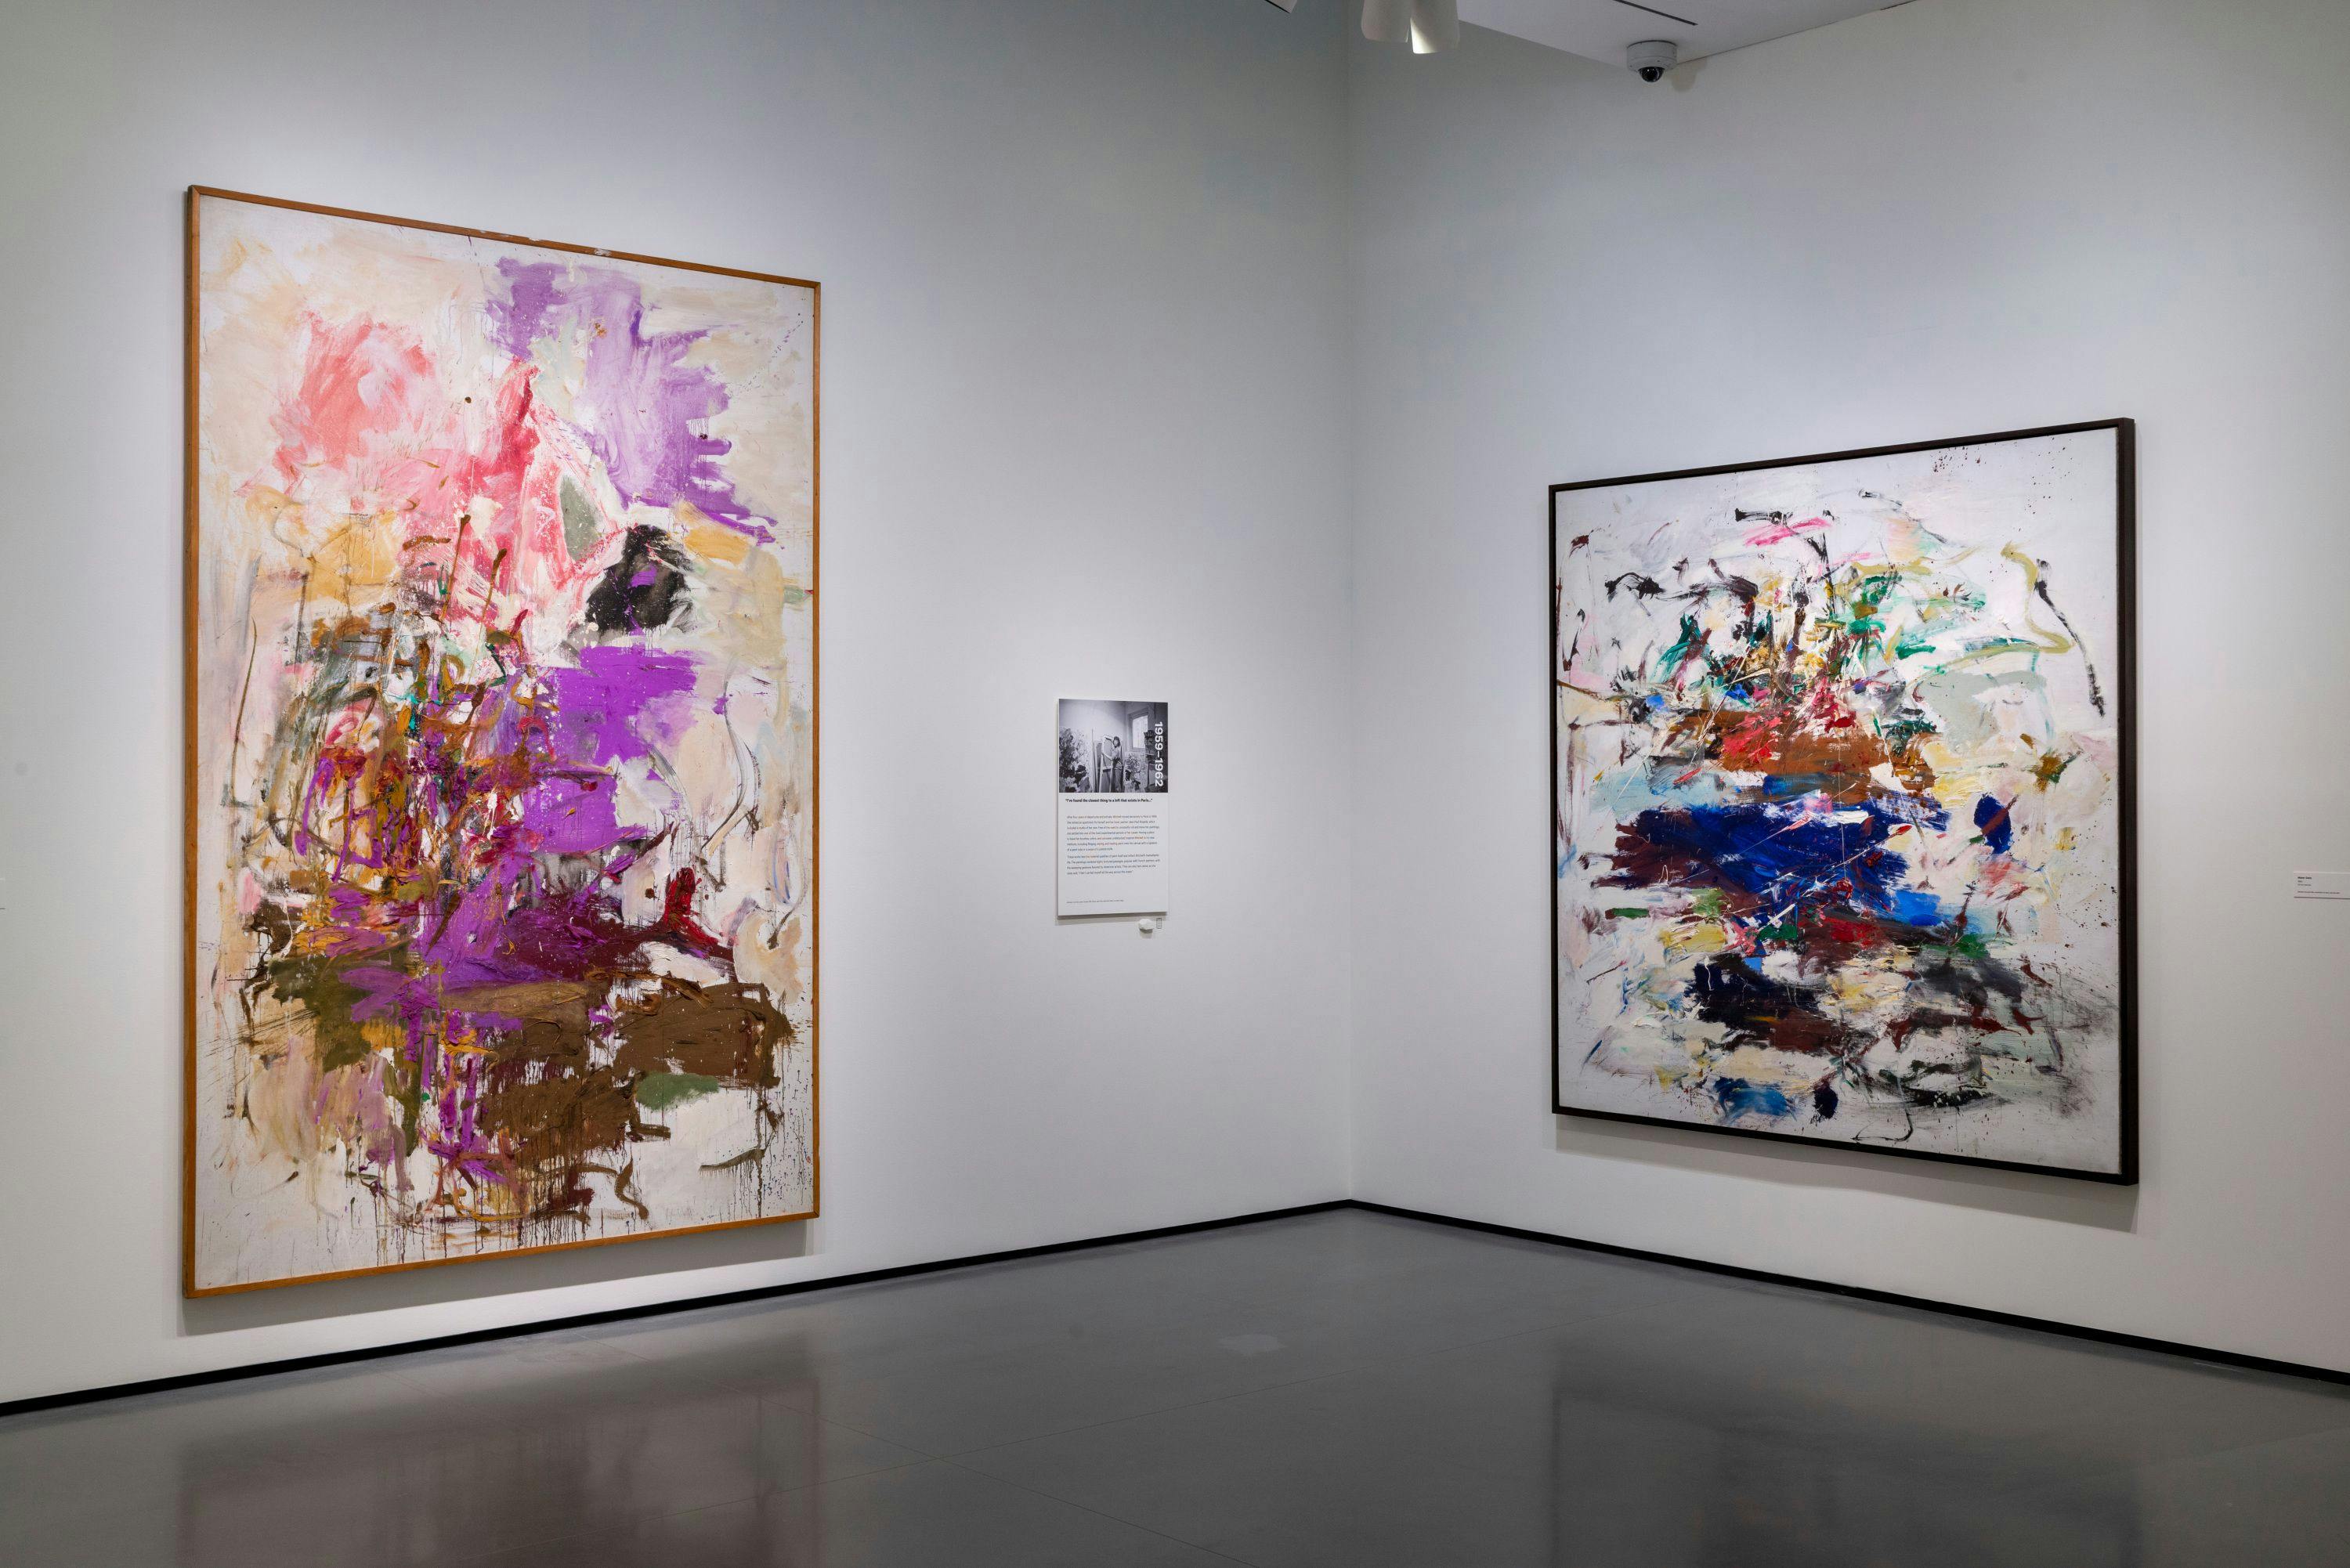 Installation view of the exhibition, Joan Mitchell, at Baltimore Museum of Art in Baltimore, dated 2022.